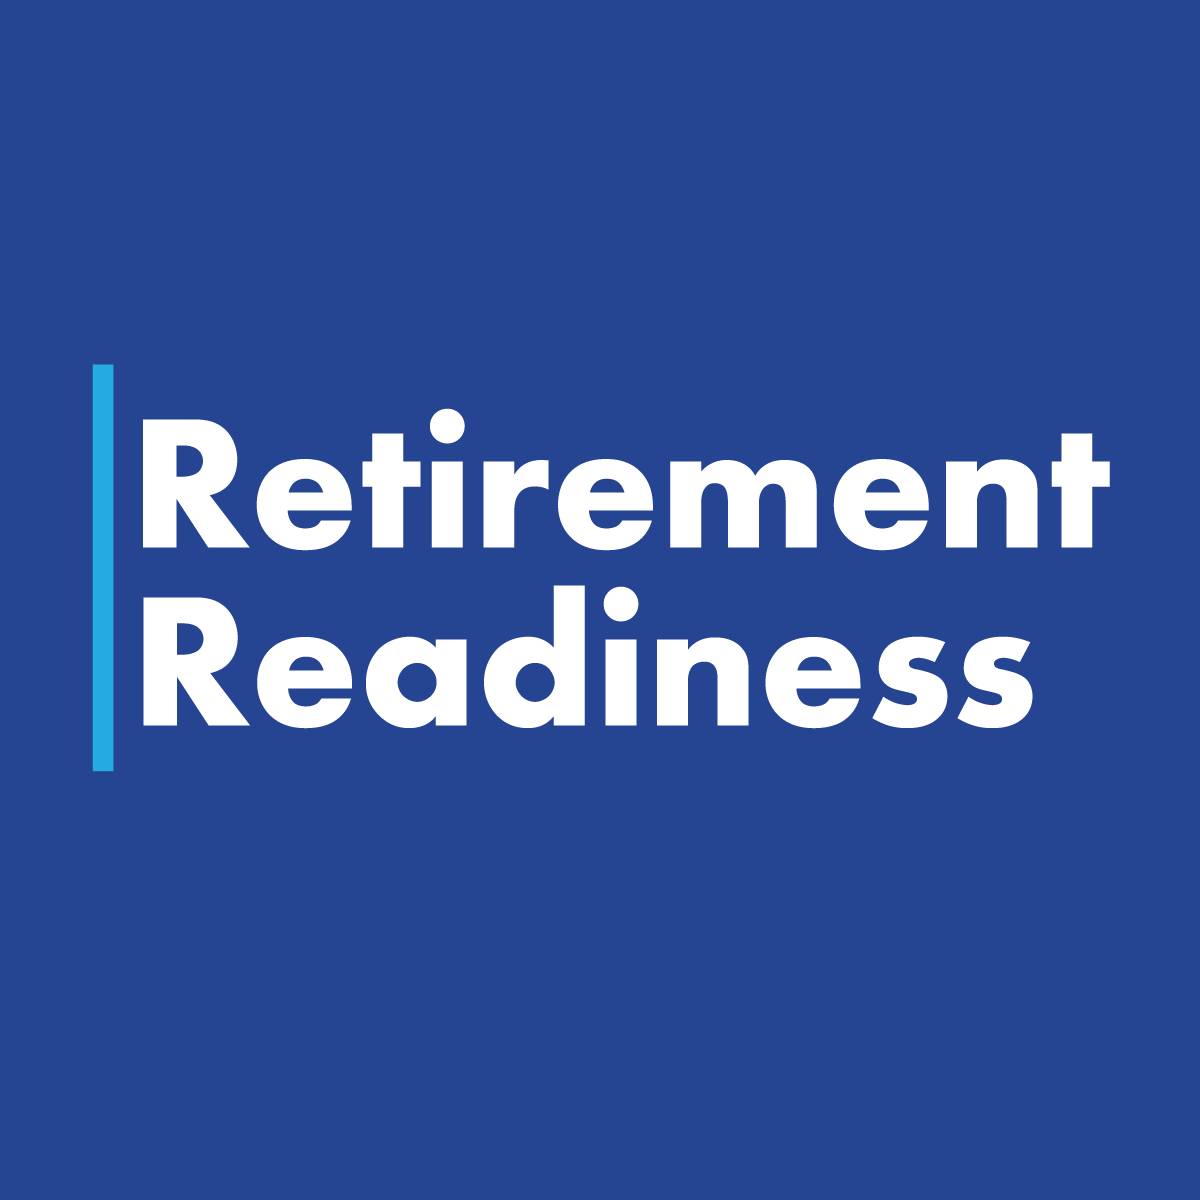 Text of Retirement Readiness